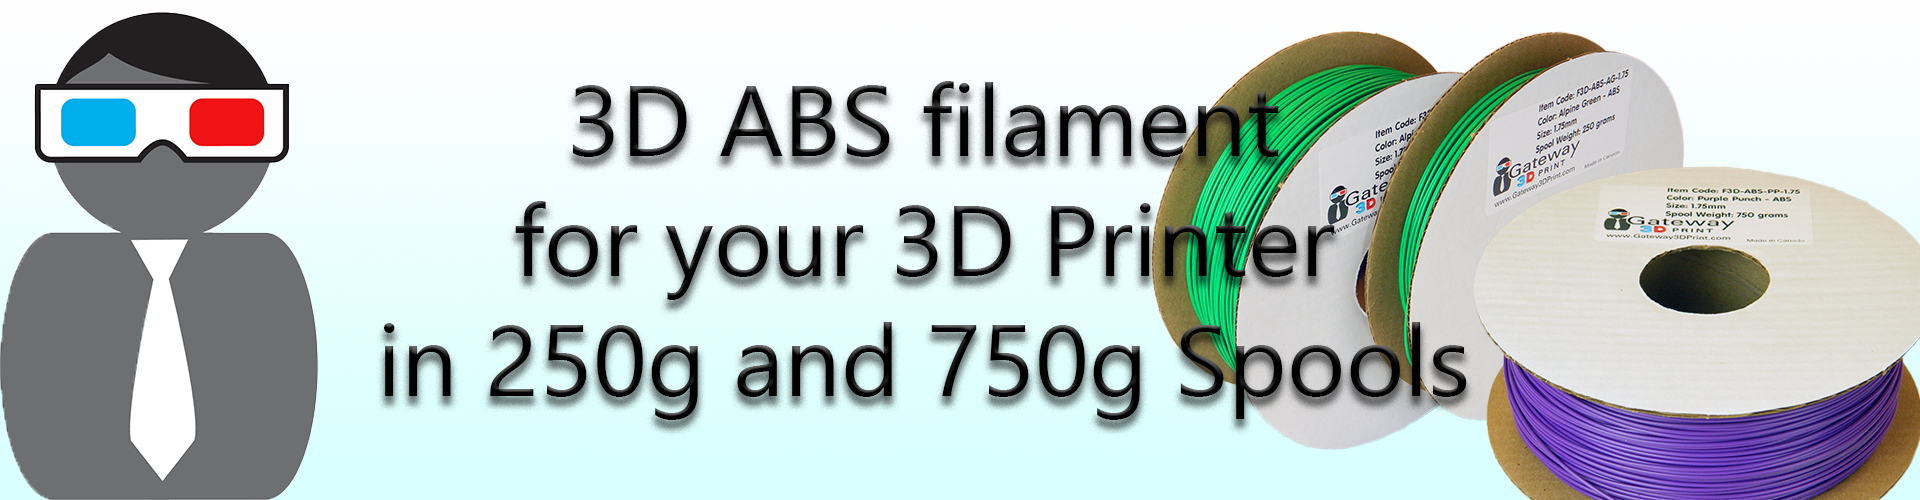 Gateway 3D ABS Filament in 250g and 750g Spools